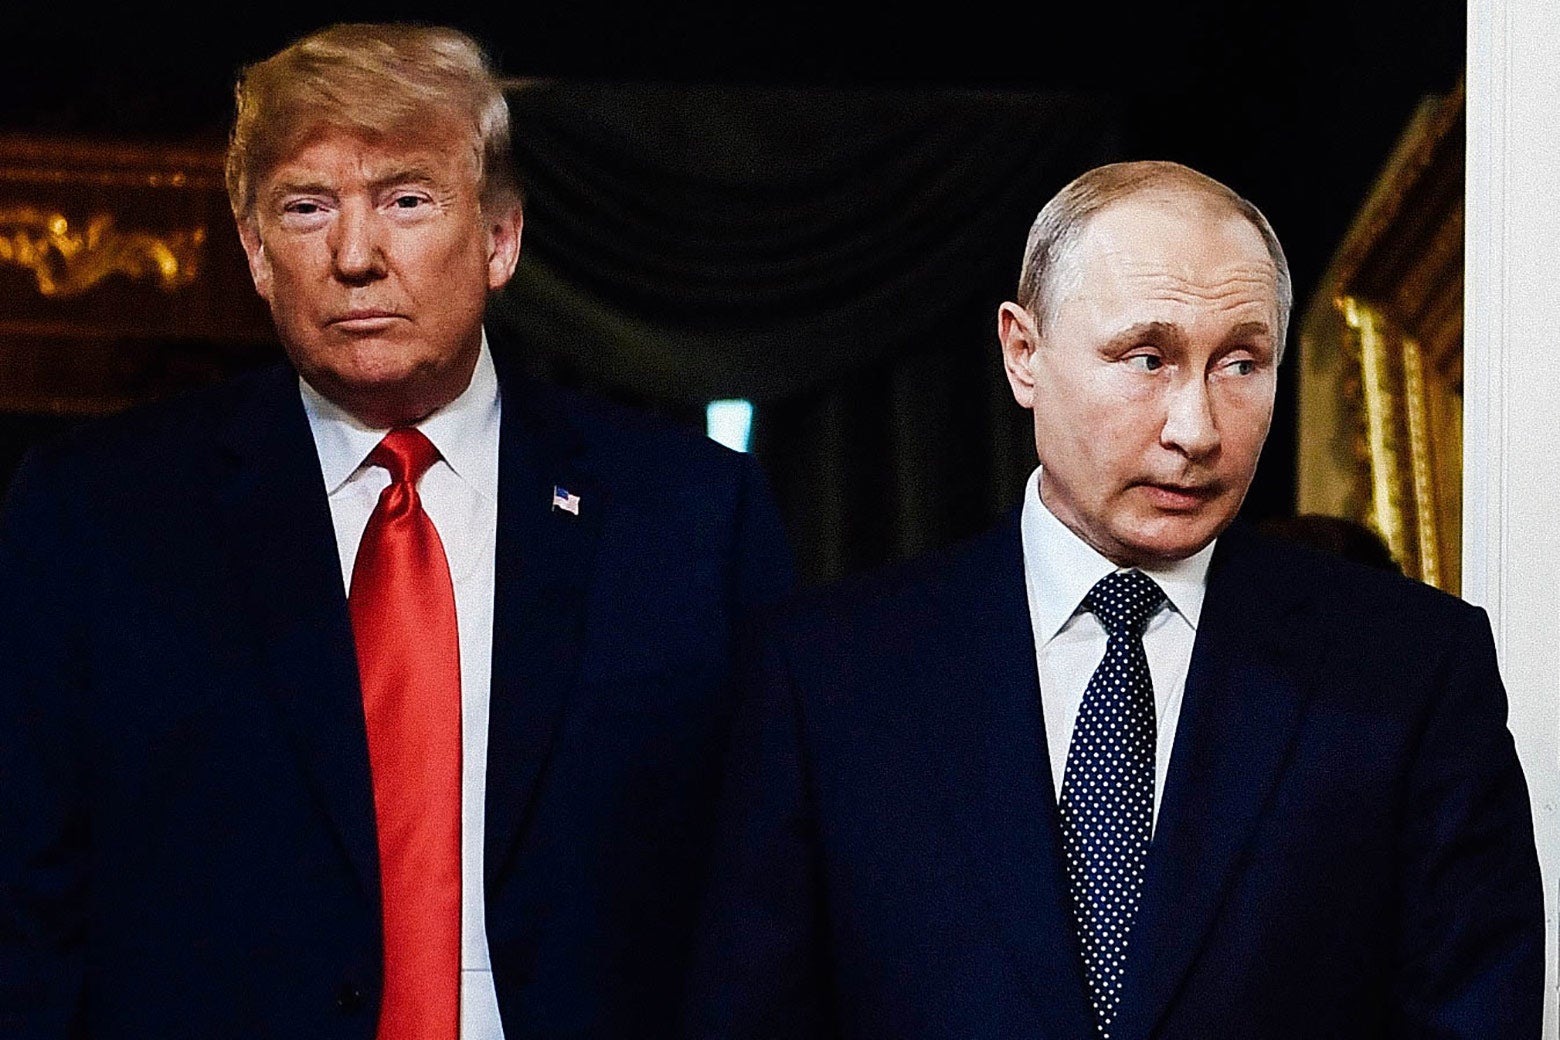 Donald Trump looks straight ahead, and Putin looks off to the side.